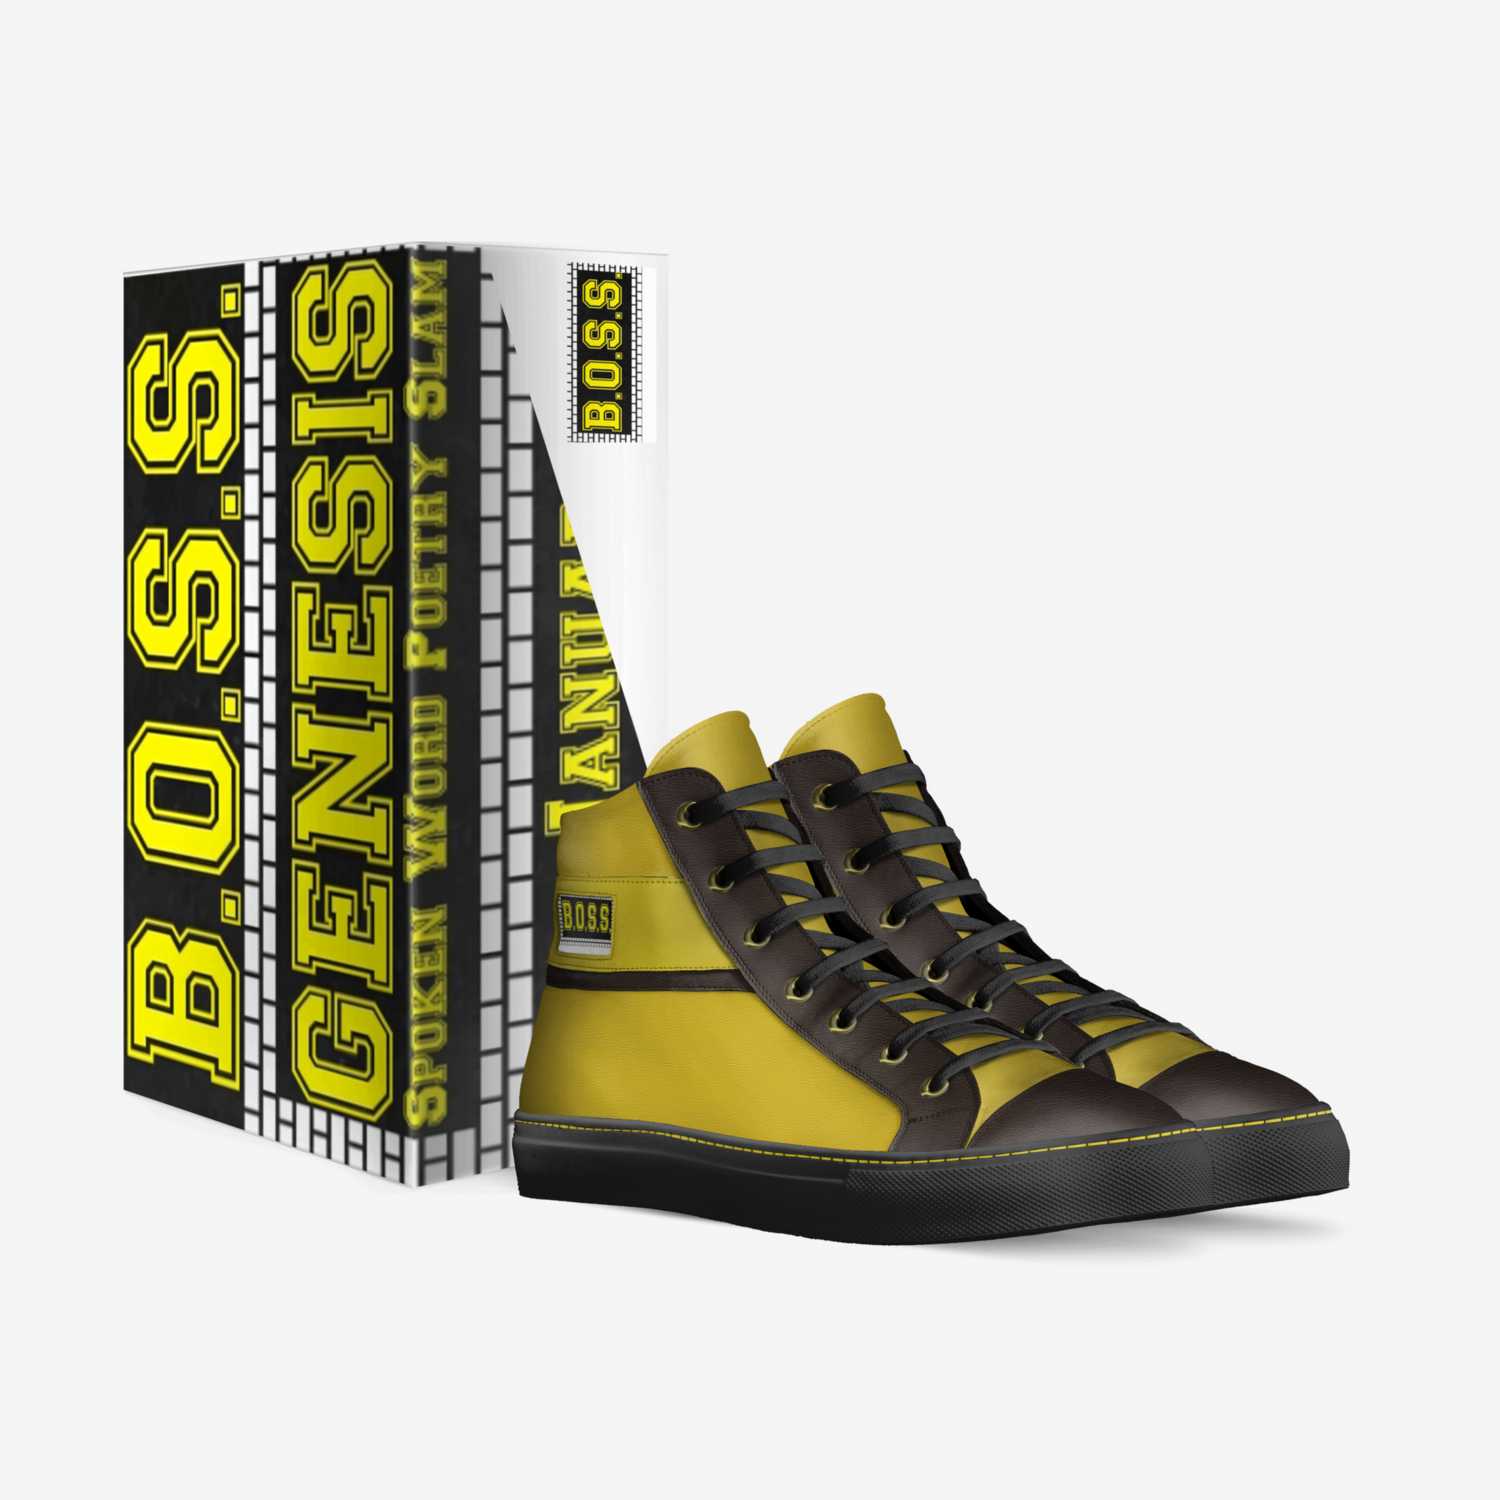 BOSSPGH custom made in Italy shoes by Bars | Box view